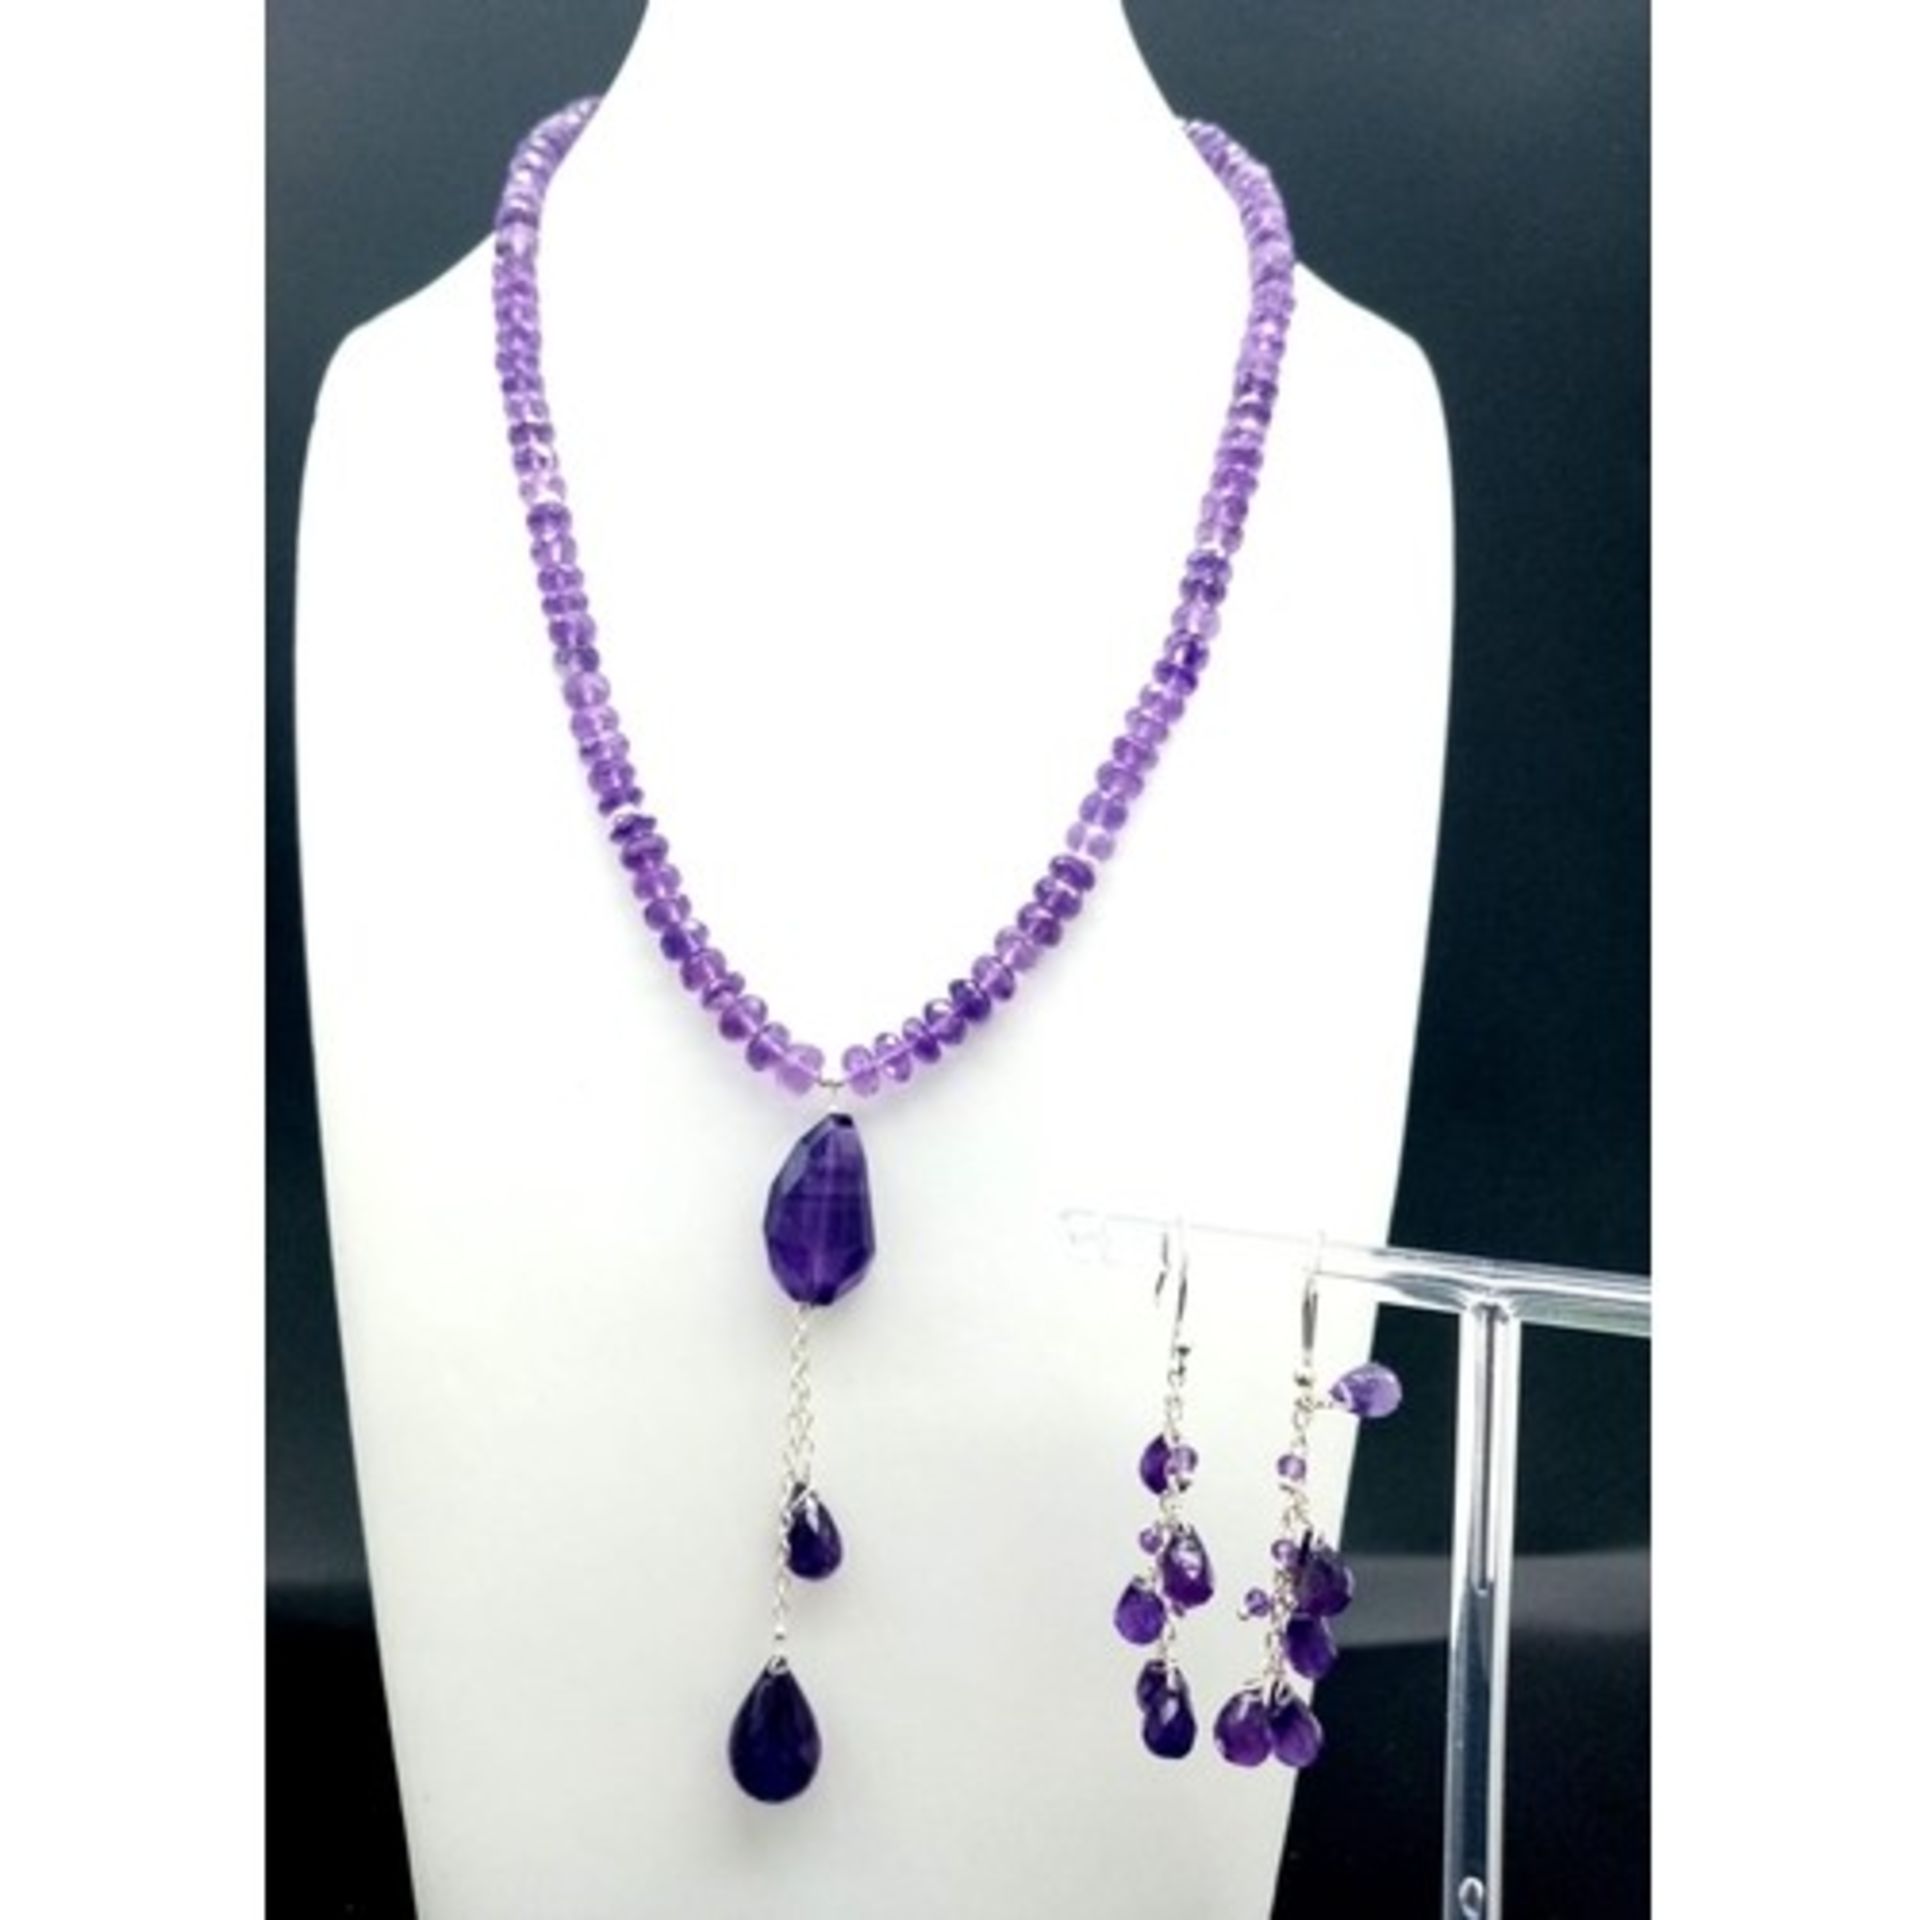 A 165ct Amethyst Gemstone Drop Necklace with a pair of amethyst drop Earrings. Necklace - 42cm